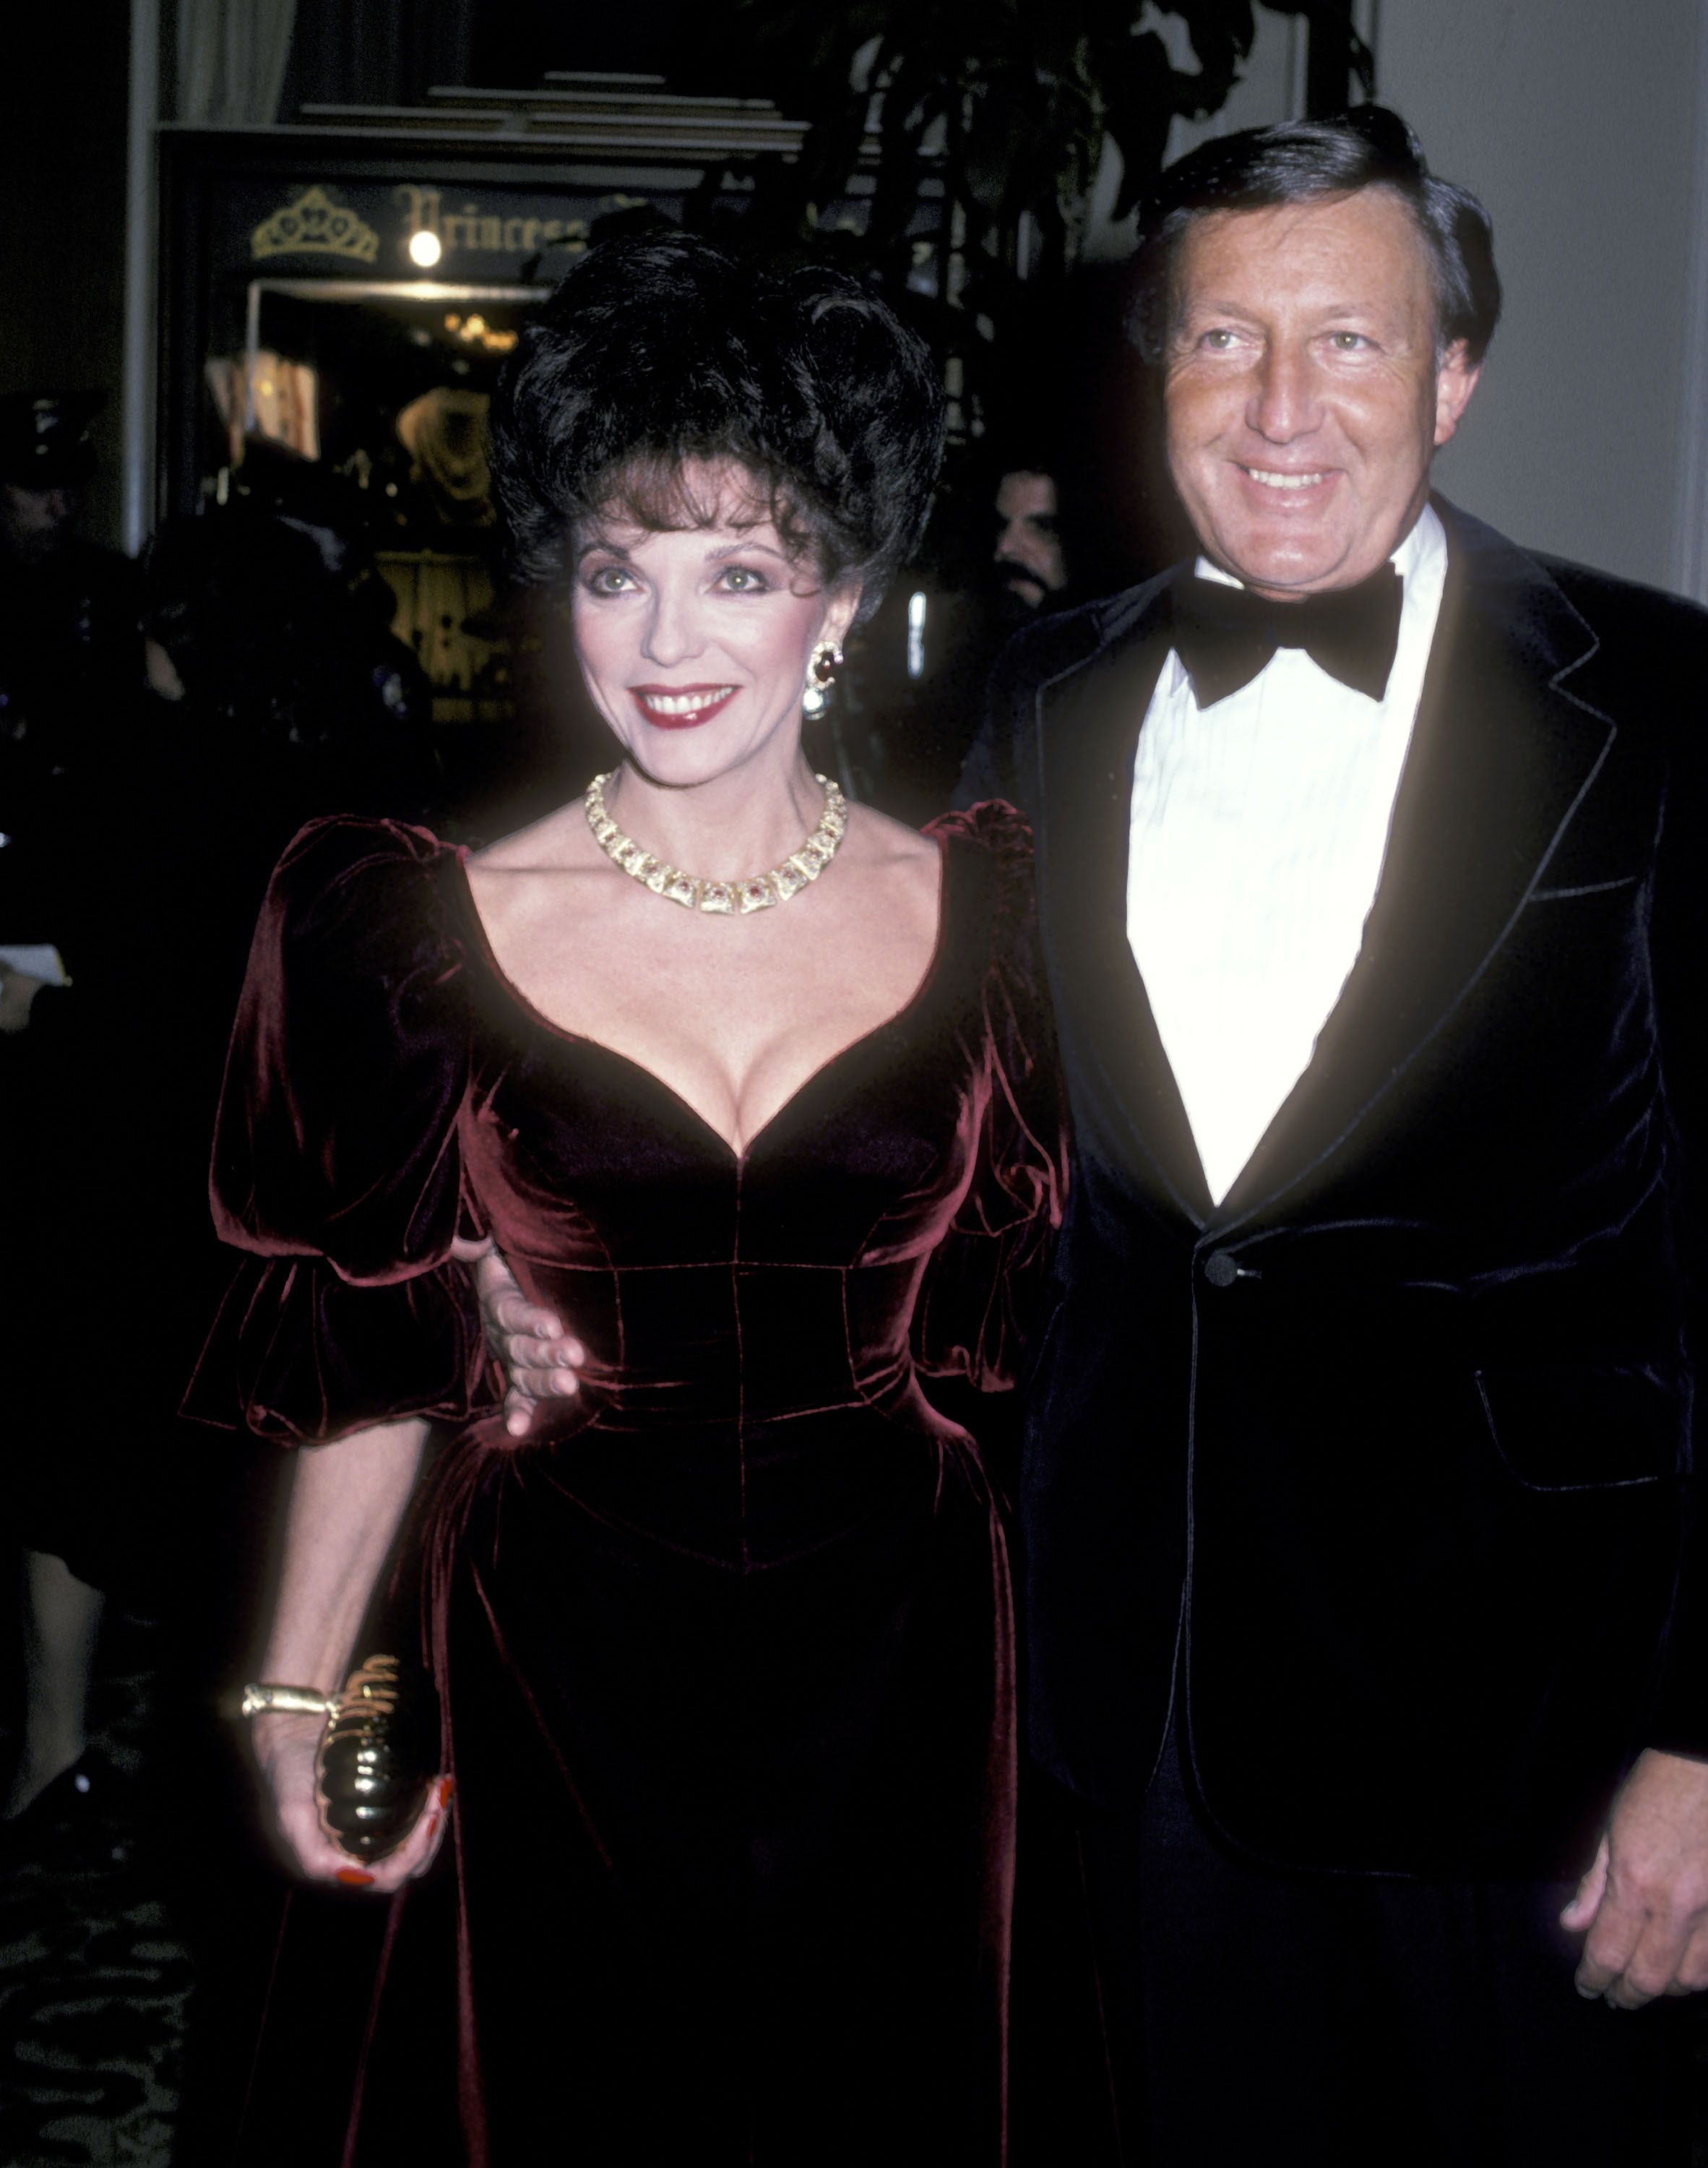 Joan Collins and husband Ronald Kass during the 39th Annual Golden Globe Awards on January 30, 1982 | Source: Getty Images